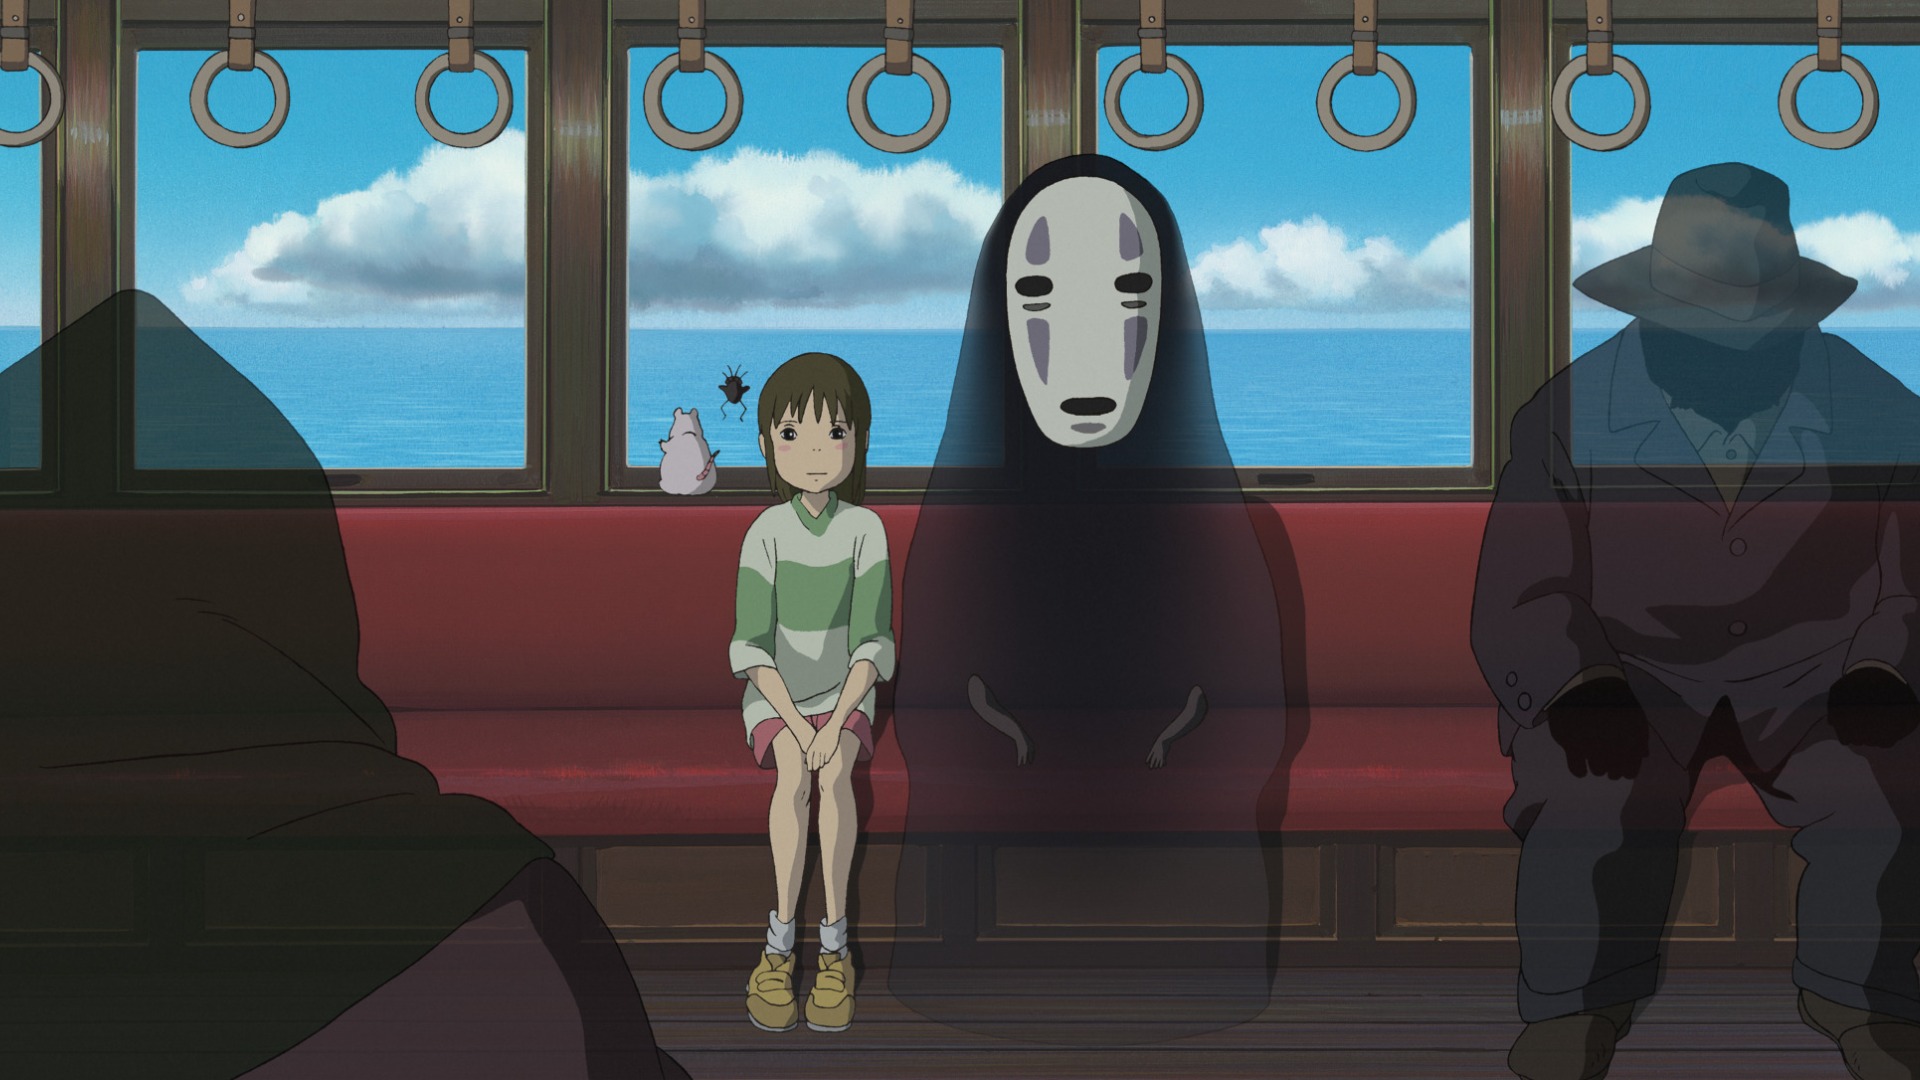 Chihiro sitting with No-Face in Spirited Away.